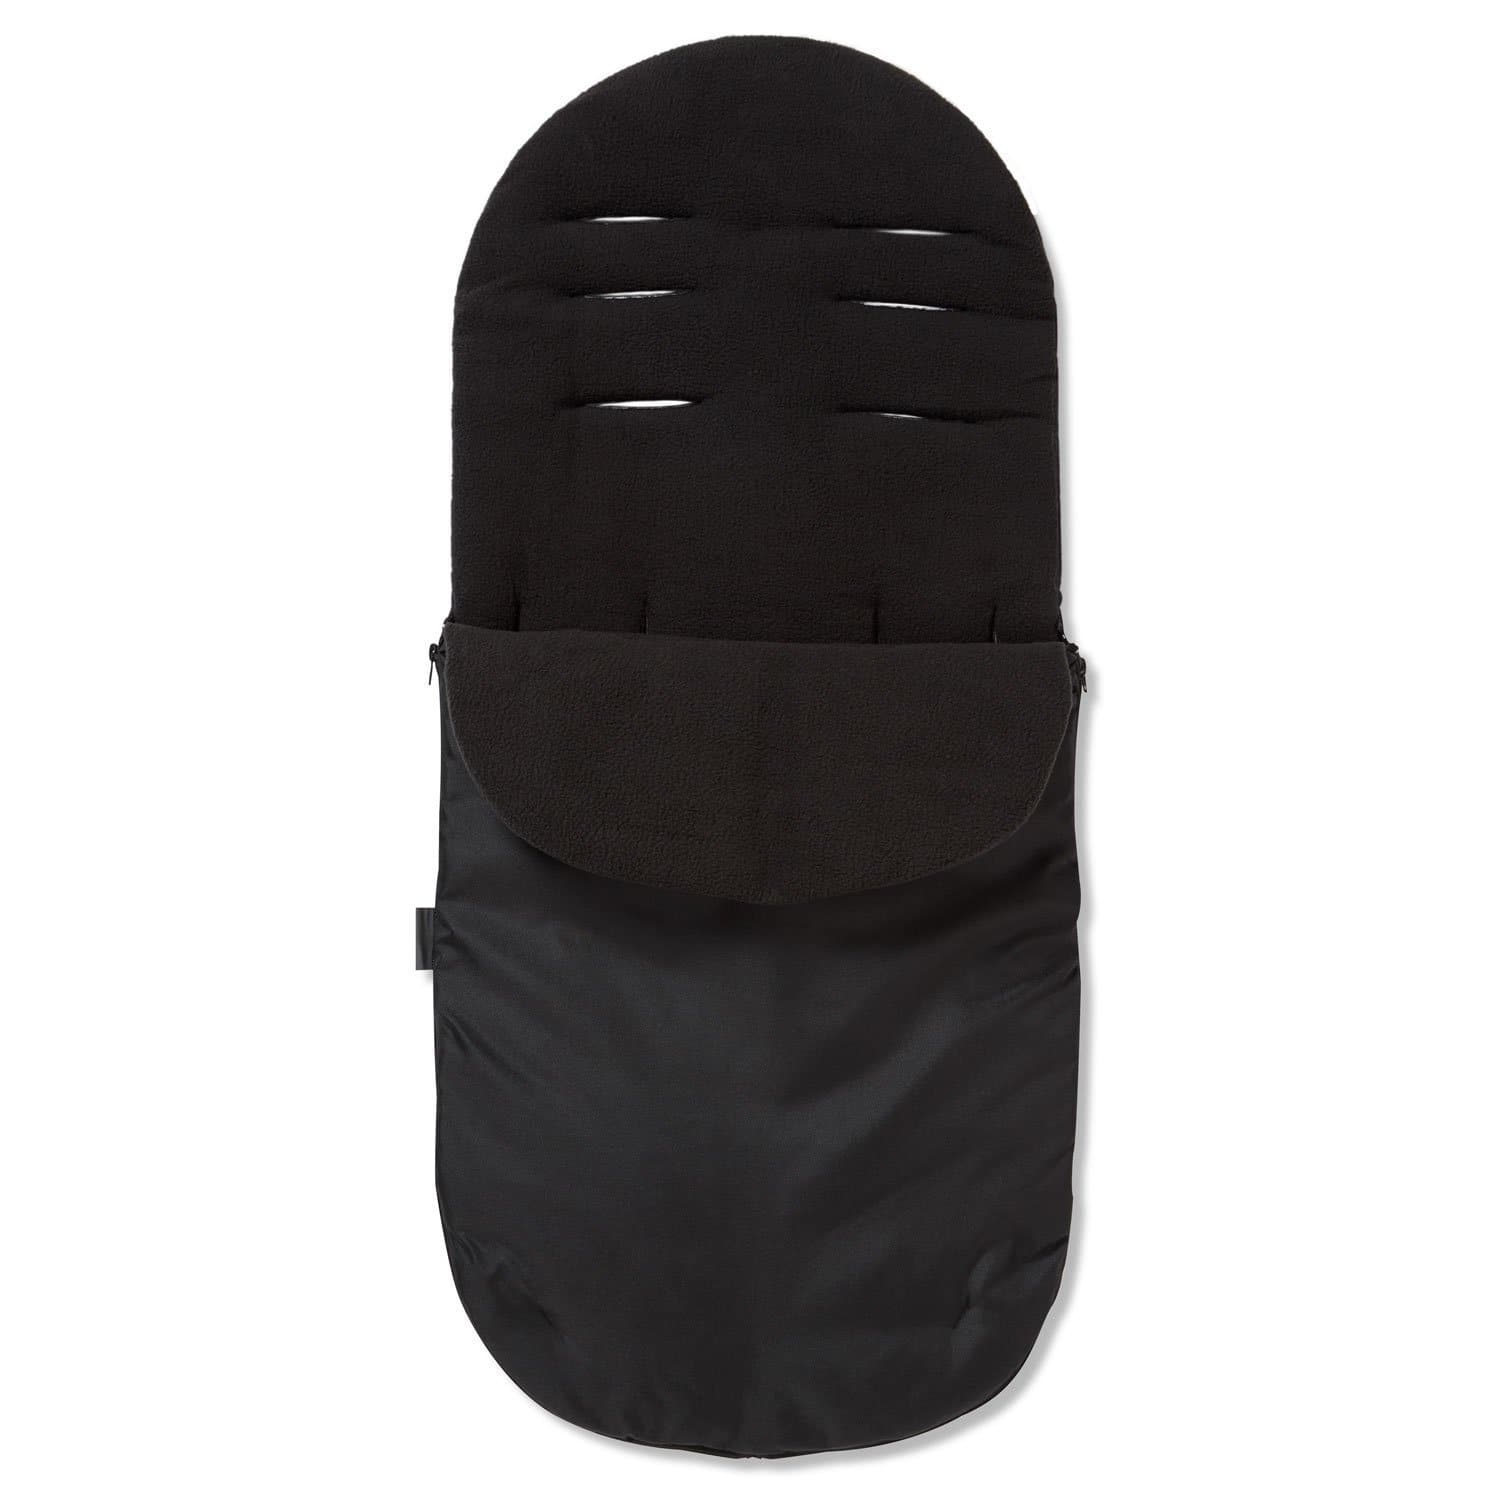 Footmuff / Cosy Toes Compatible with GB - Black / Fits All Models | For Your Little One